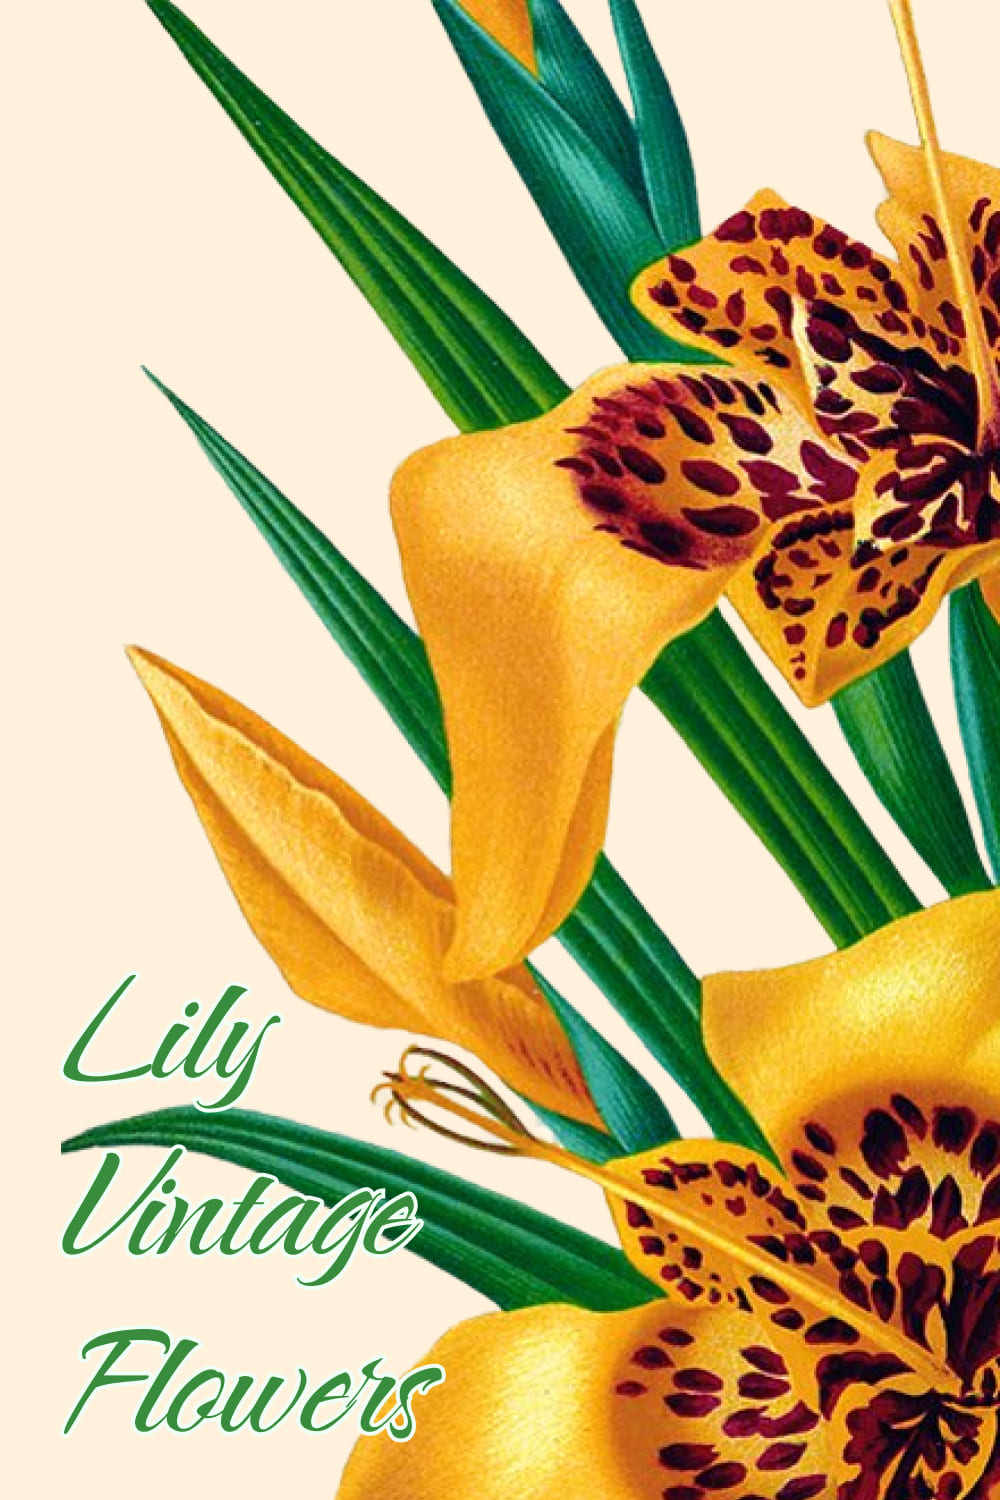 Lily Clipart Vintage Flowers - preview image.